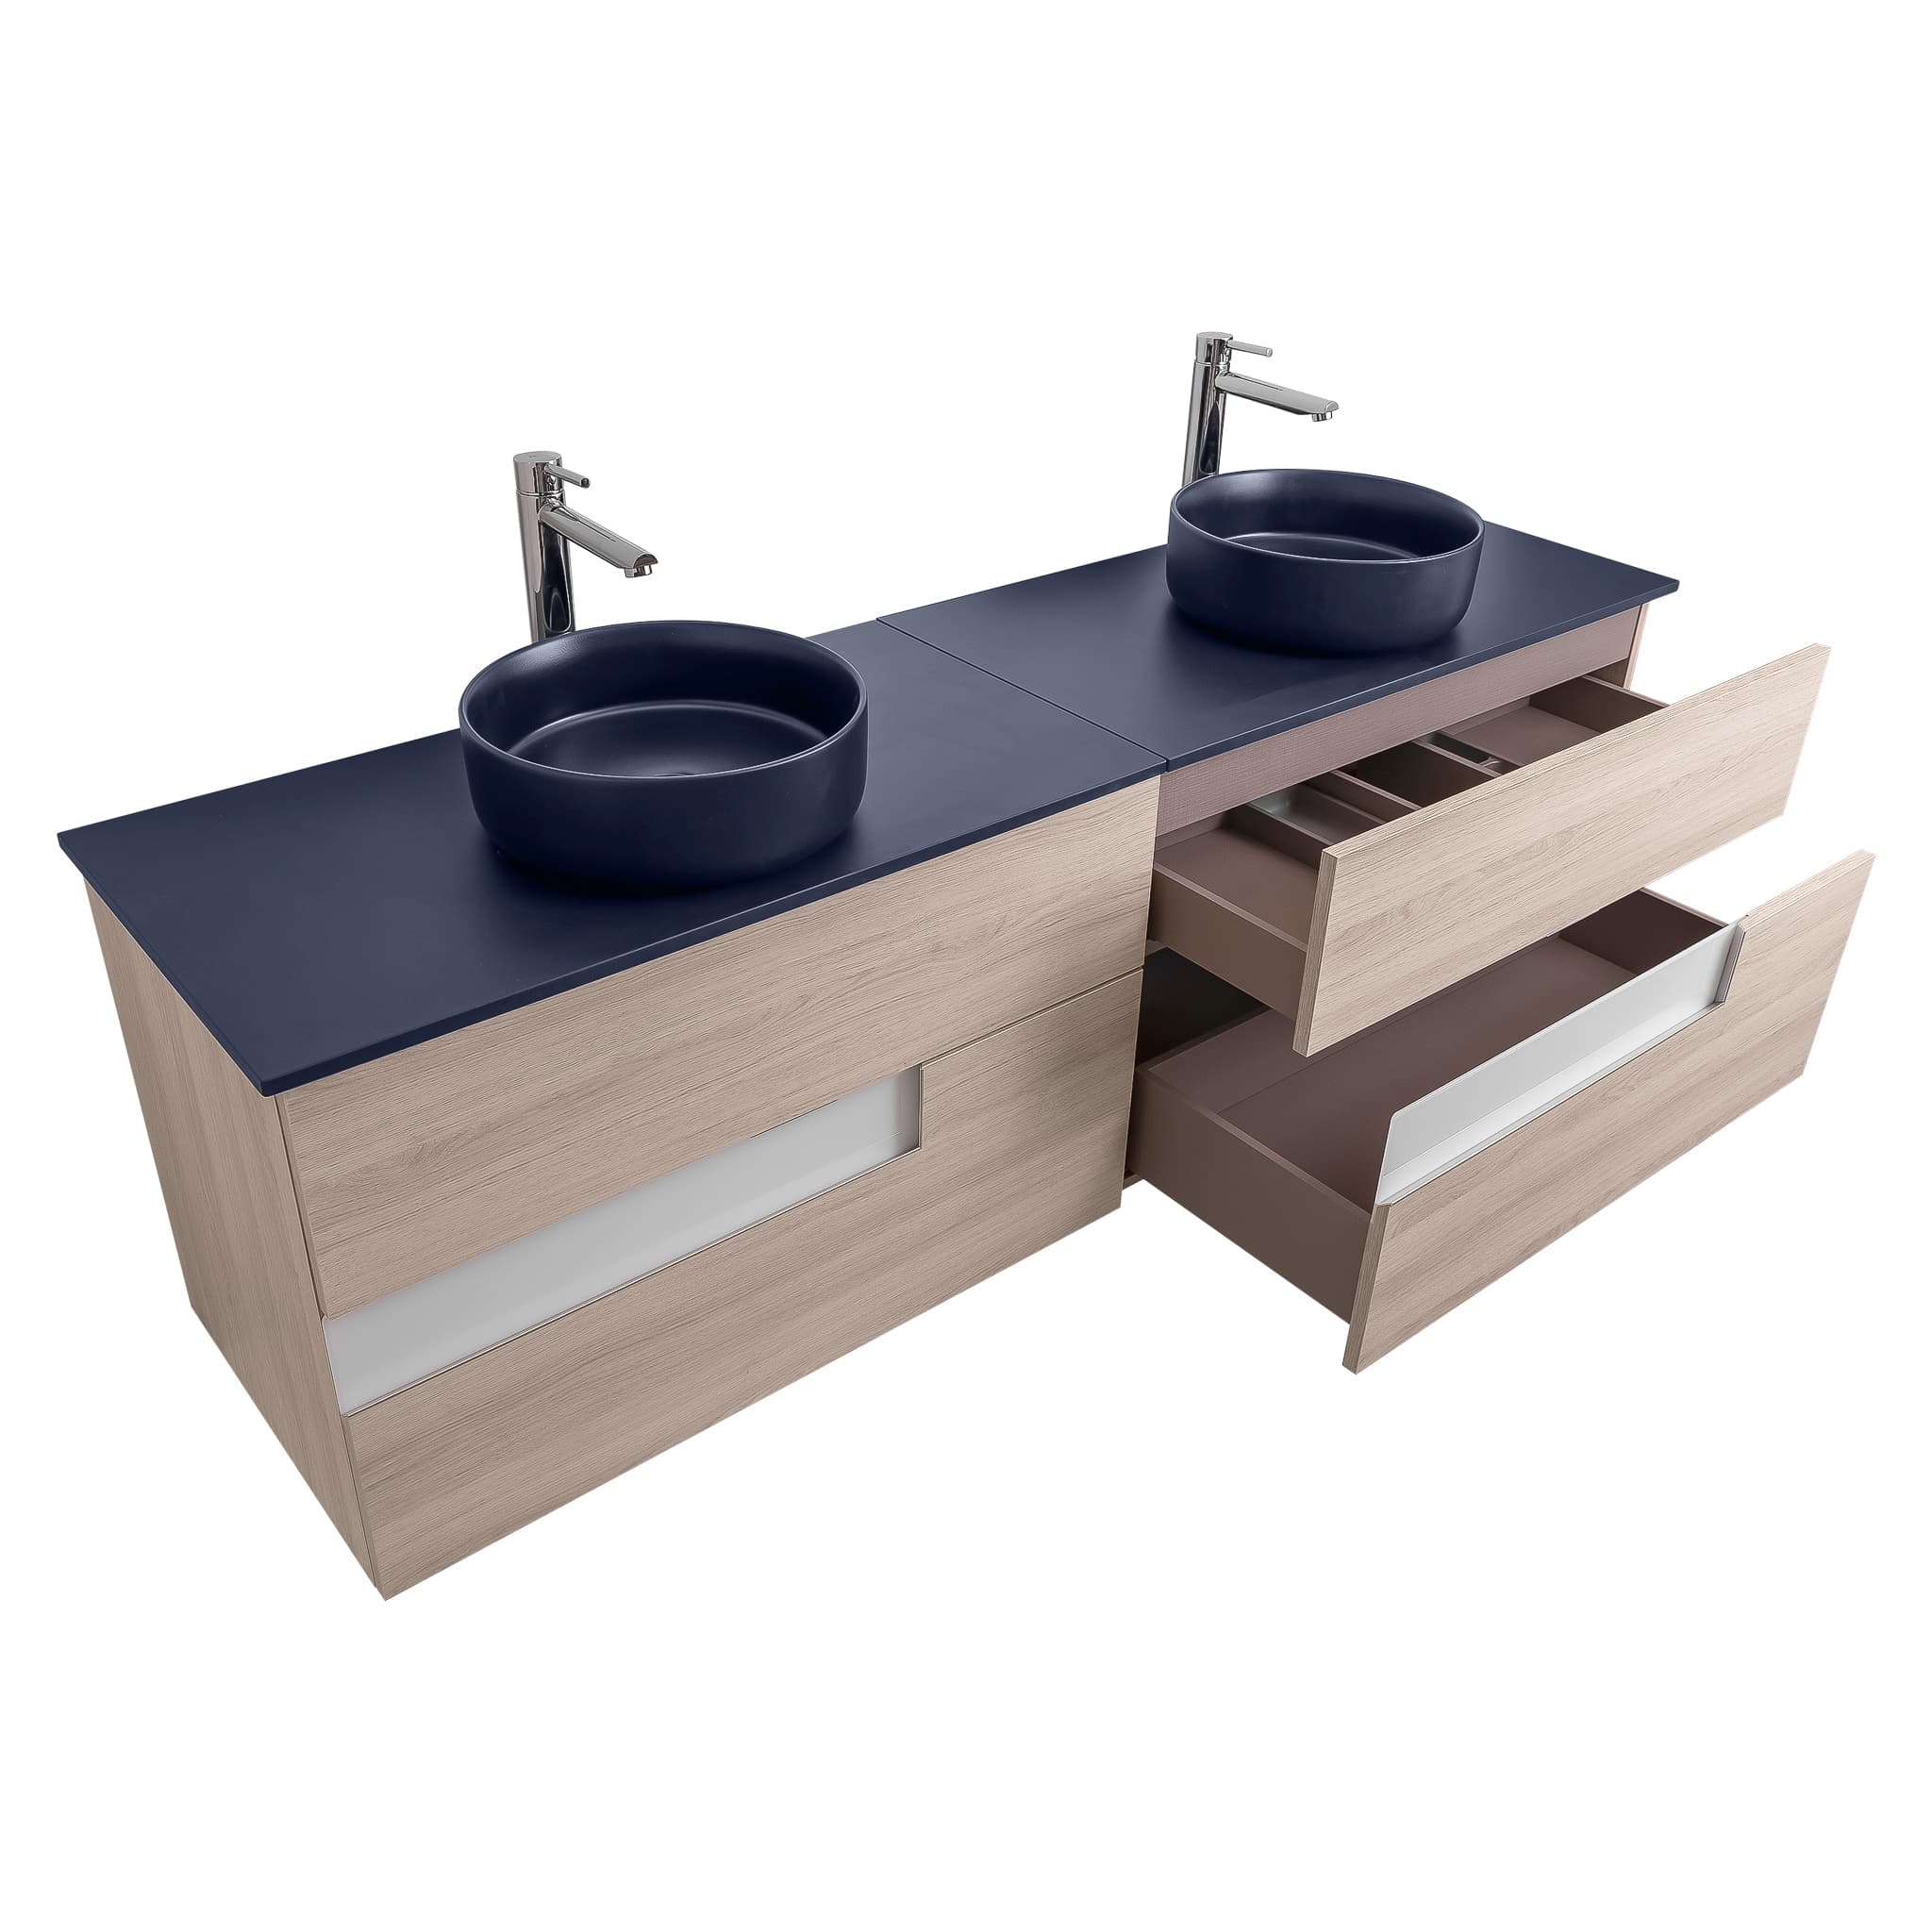 Vision 72 Natural Light Wood Cabinet, Ares Navy Blue Top And Two Ares Navy Blue Ceramic Basin, Wall Mounted Modern Vanity Set